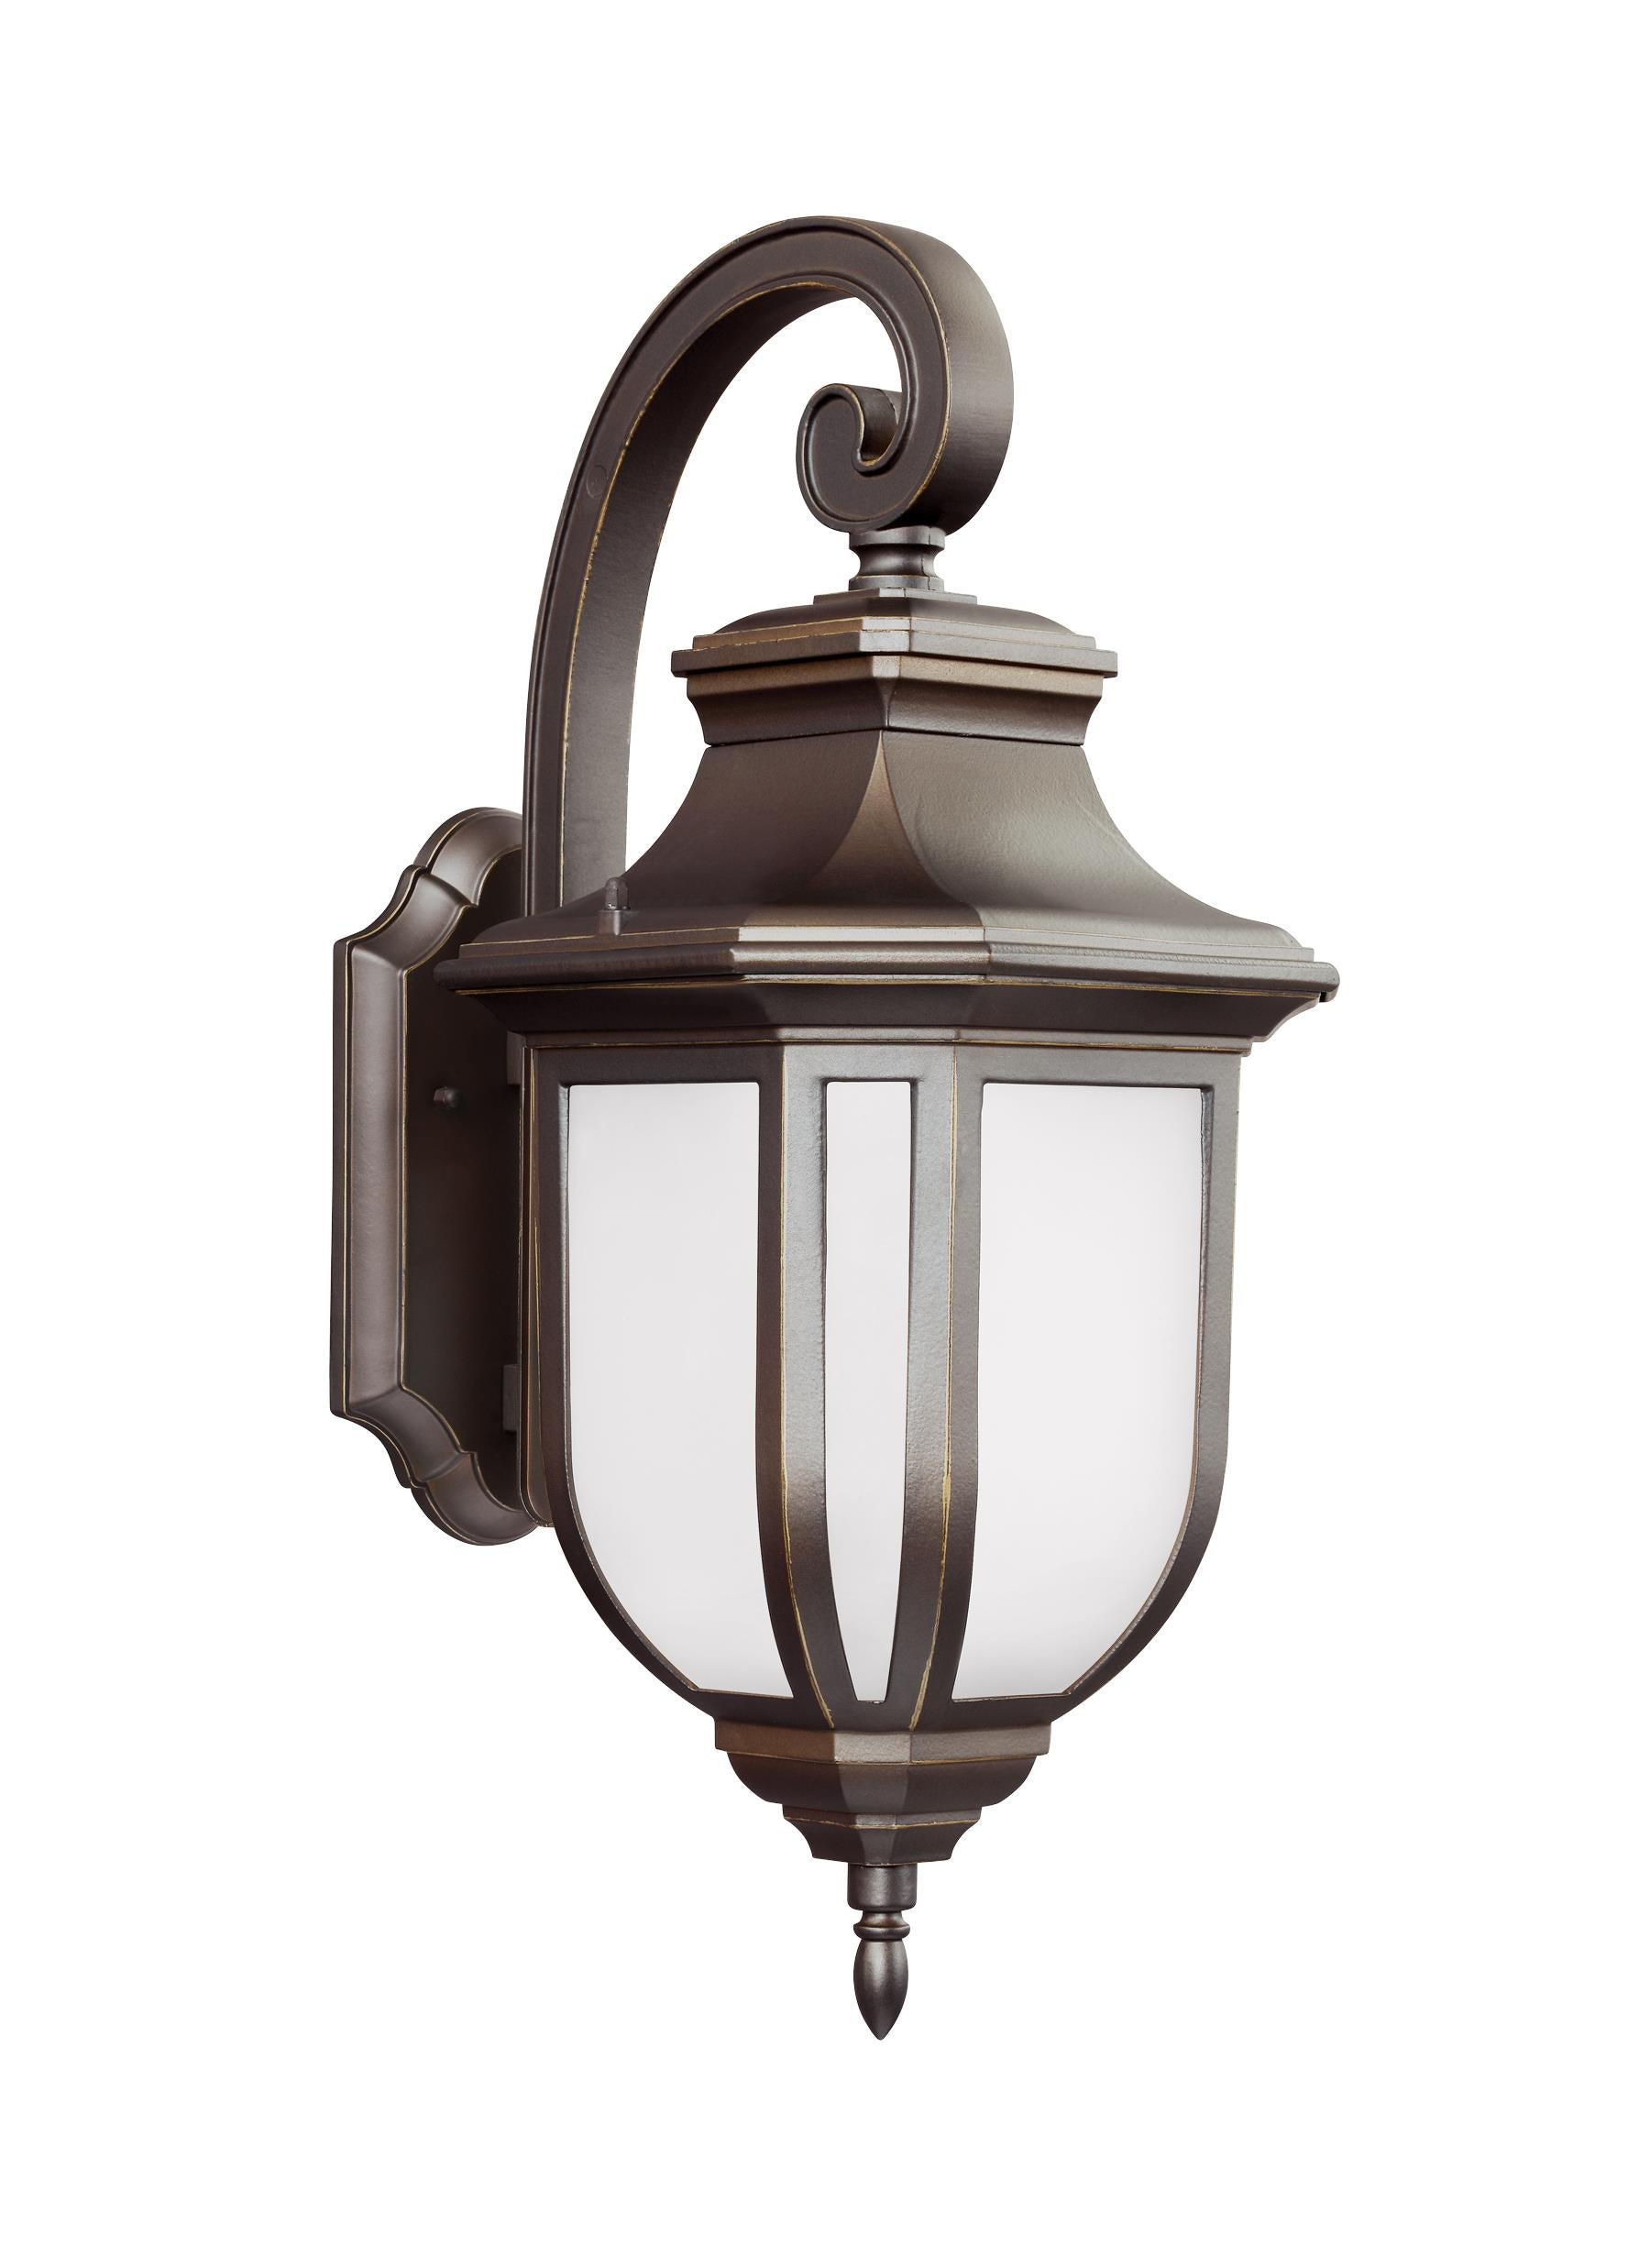 Childress traditional 1-light outdoor exterior large wall lantern sconce in antique bronze finish with satin etched glass ...